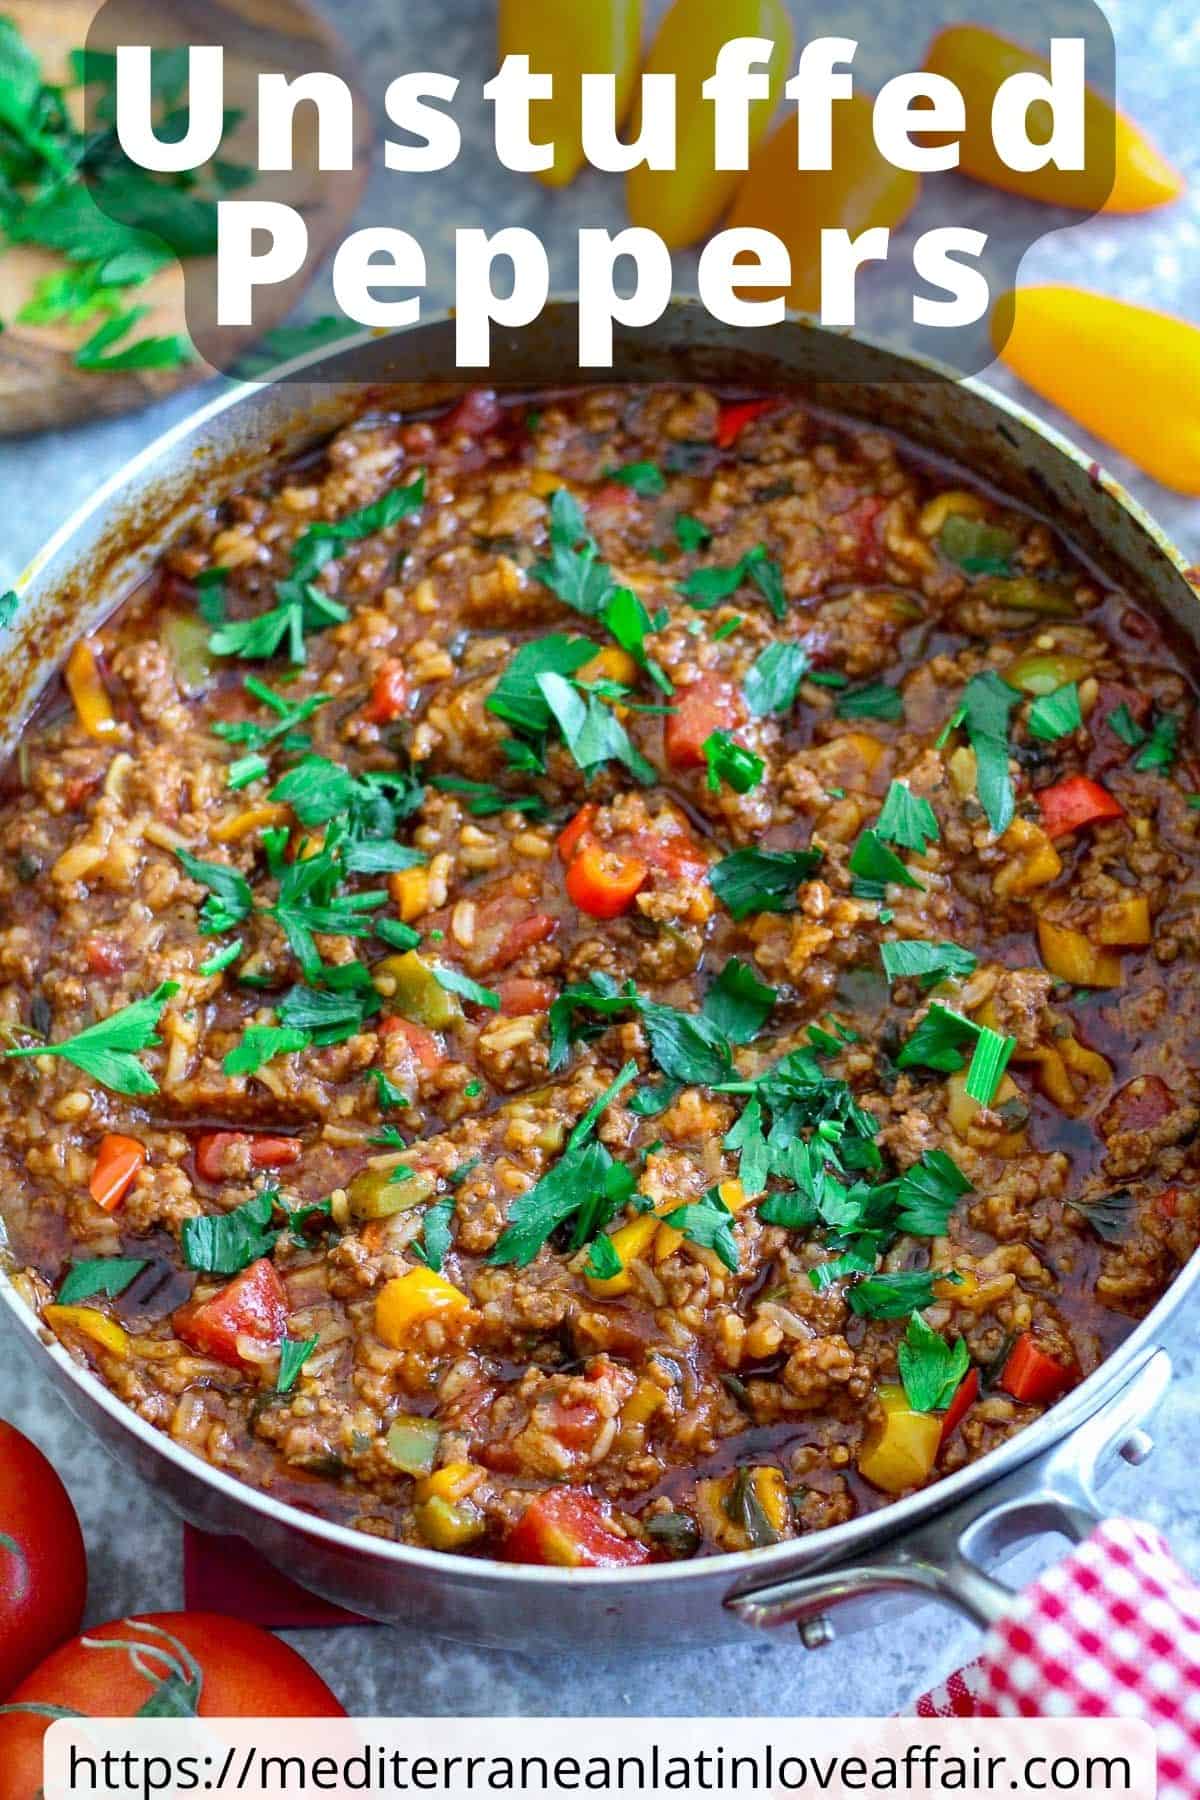 An image prepared for Pinterest. It shows a skillet with ground beef, peppers, rice and lots of yummy ingredients. There's a title bar on top that reads Unstuffed Peppers and a website link at the bottom.